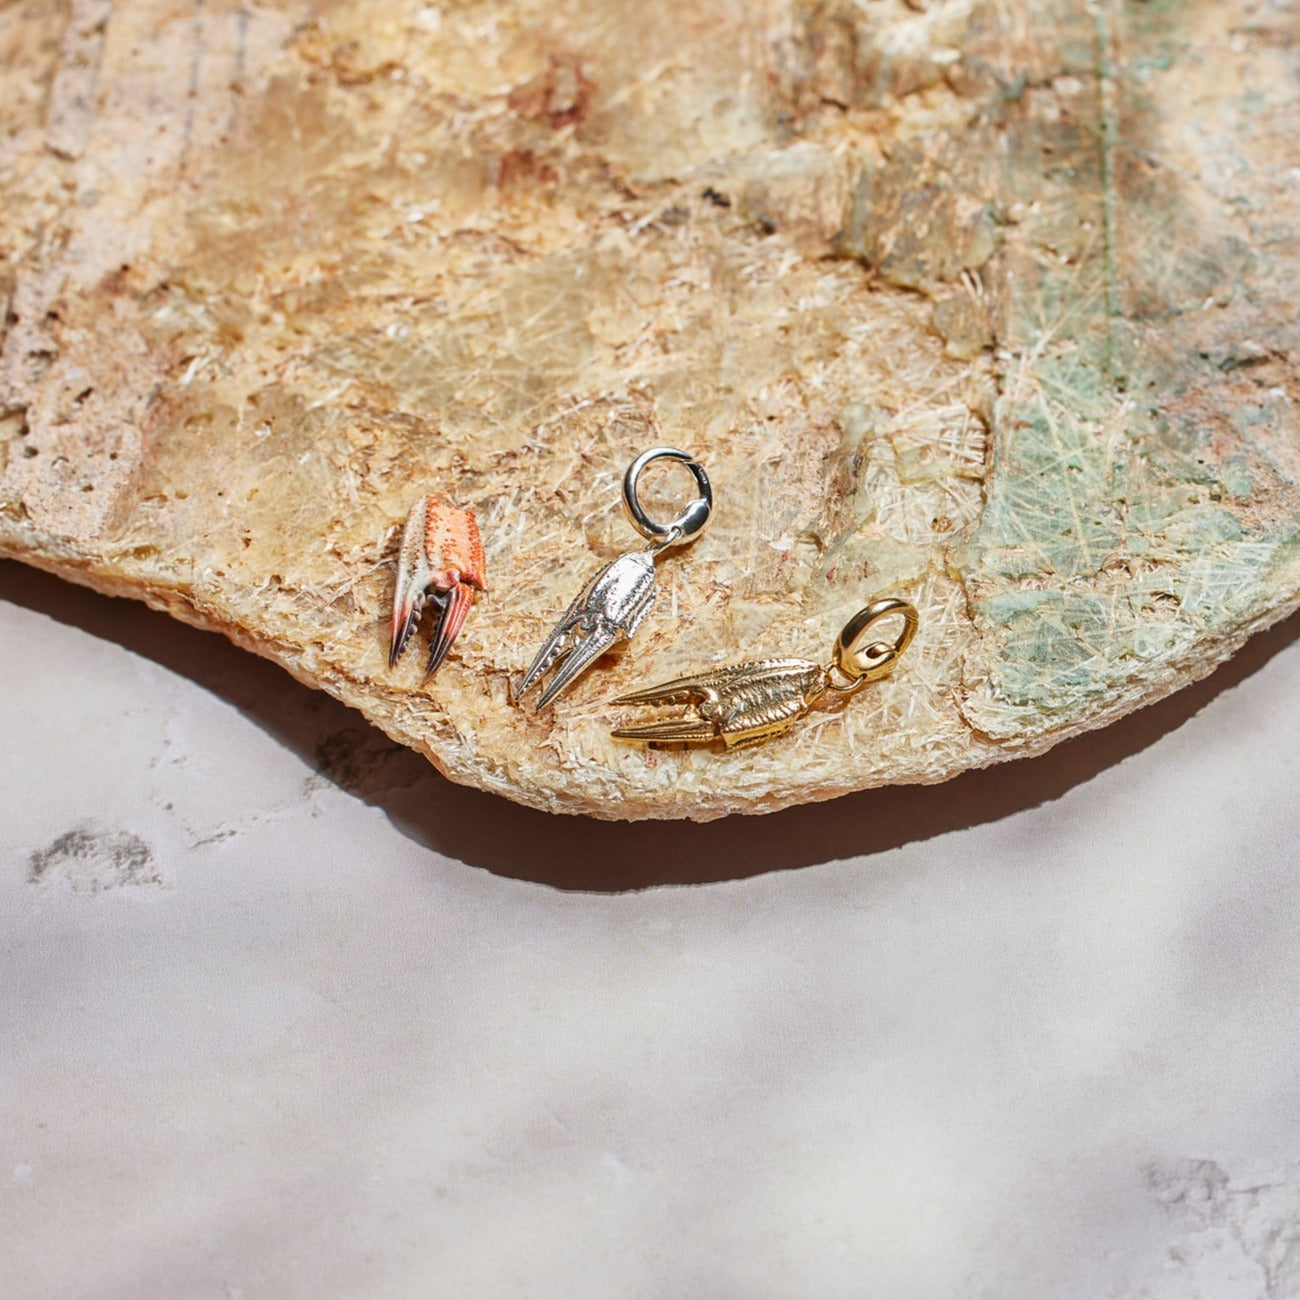 Cromer pendant. Cromer charm. Cromer necklace. Cromer Norfolk. Norfolk jewellery. Norfolk shell jewellery. Silver shell jewellery. Gold shell jewellery. Those Happy Places. Serena Ansell Jewellery.